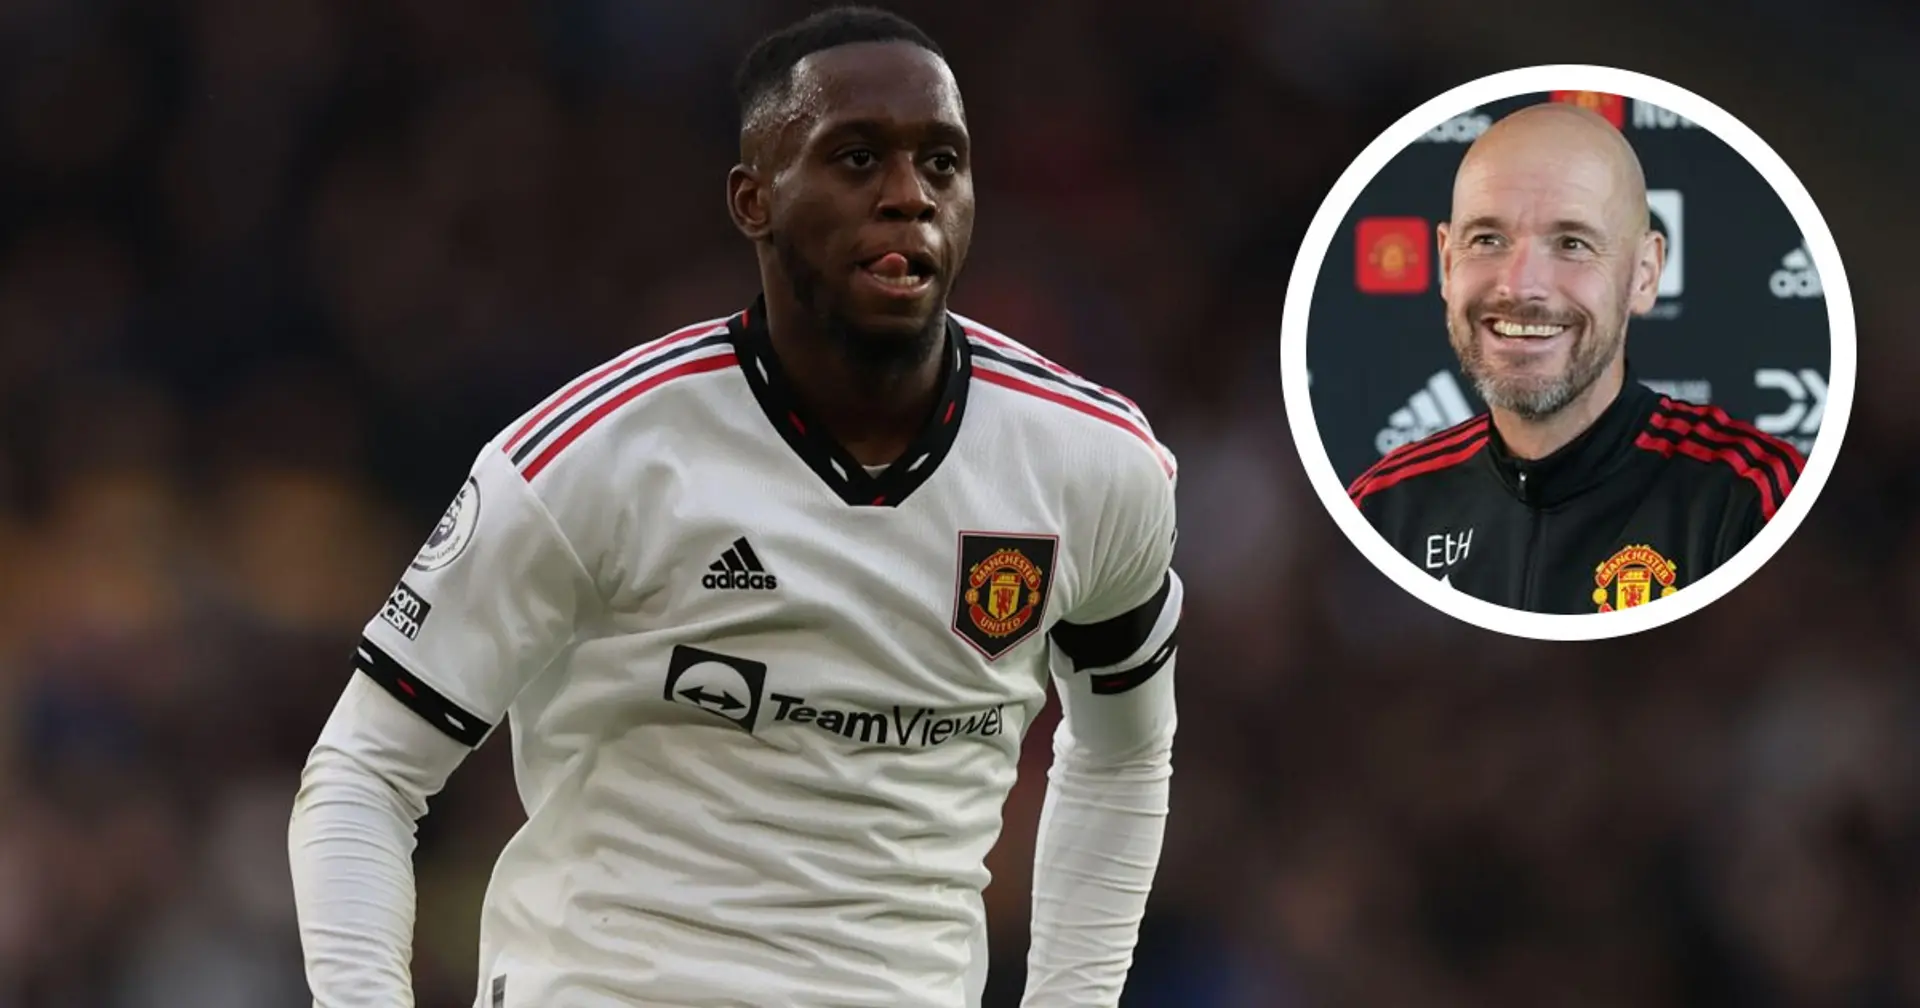 'He was in a bad situation': Ten Hag explains how Wan-Bissaka bounced back at Man United